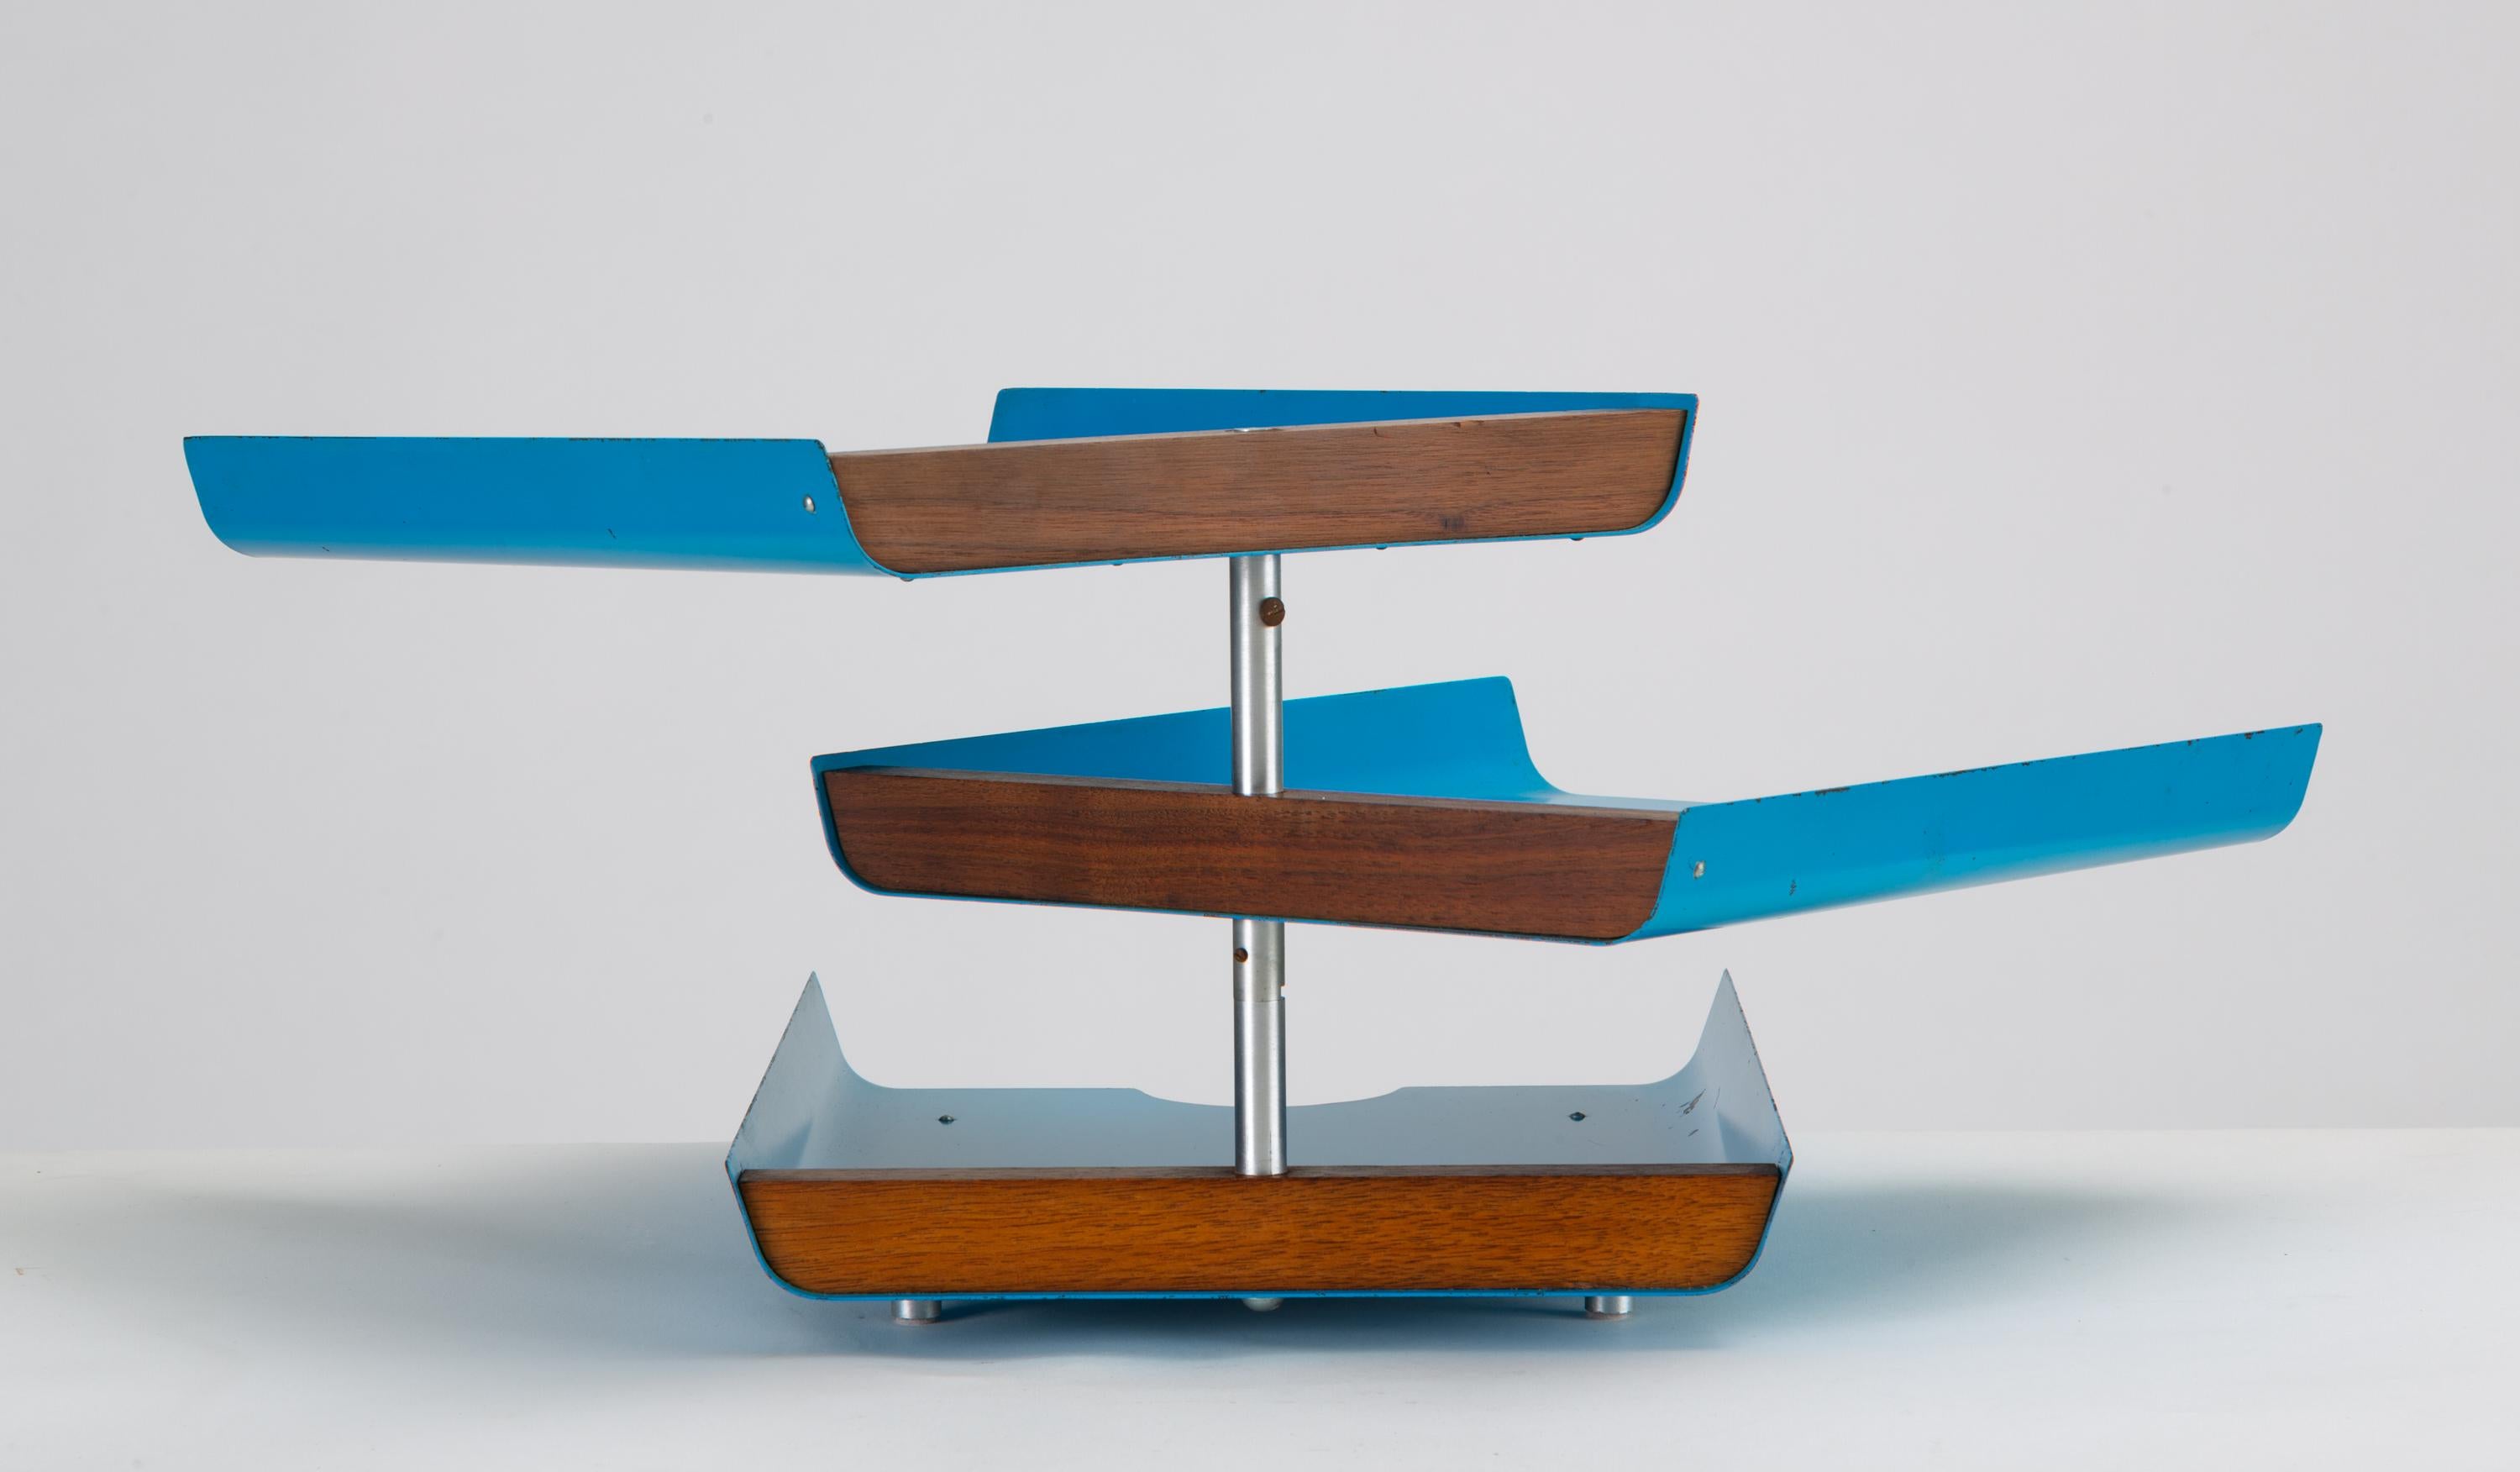 Enameled Peter Pepper Products Three-Tiered Paper Tray in Original Blue Enamel